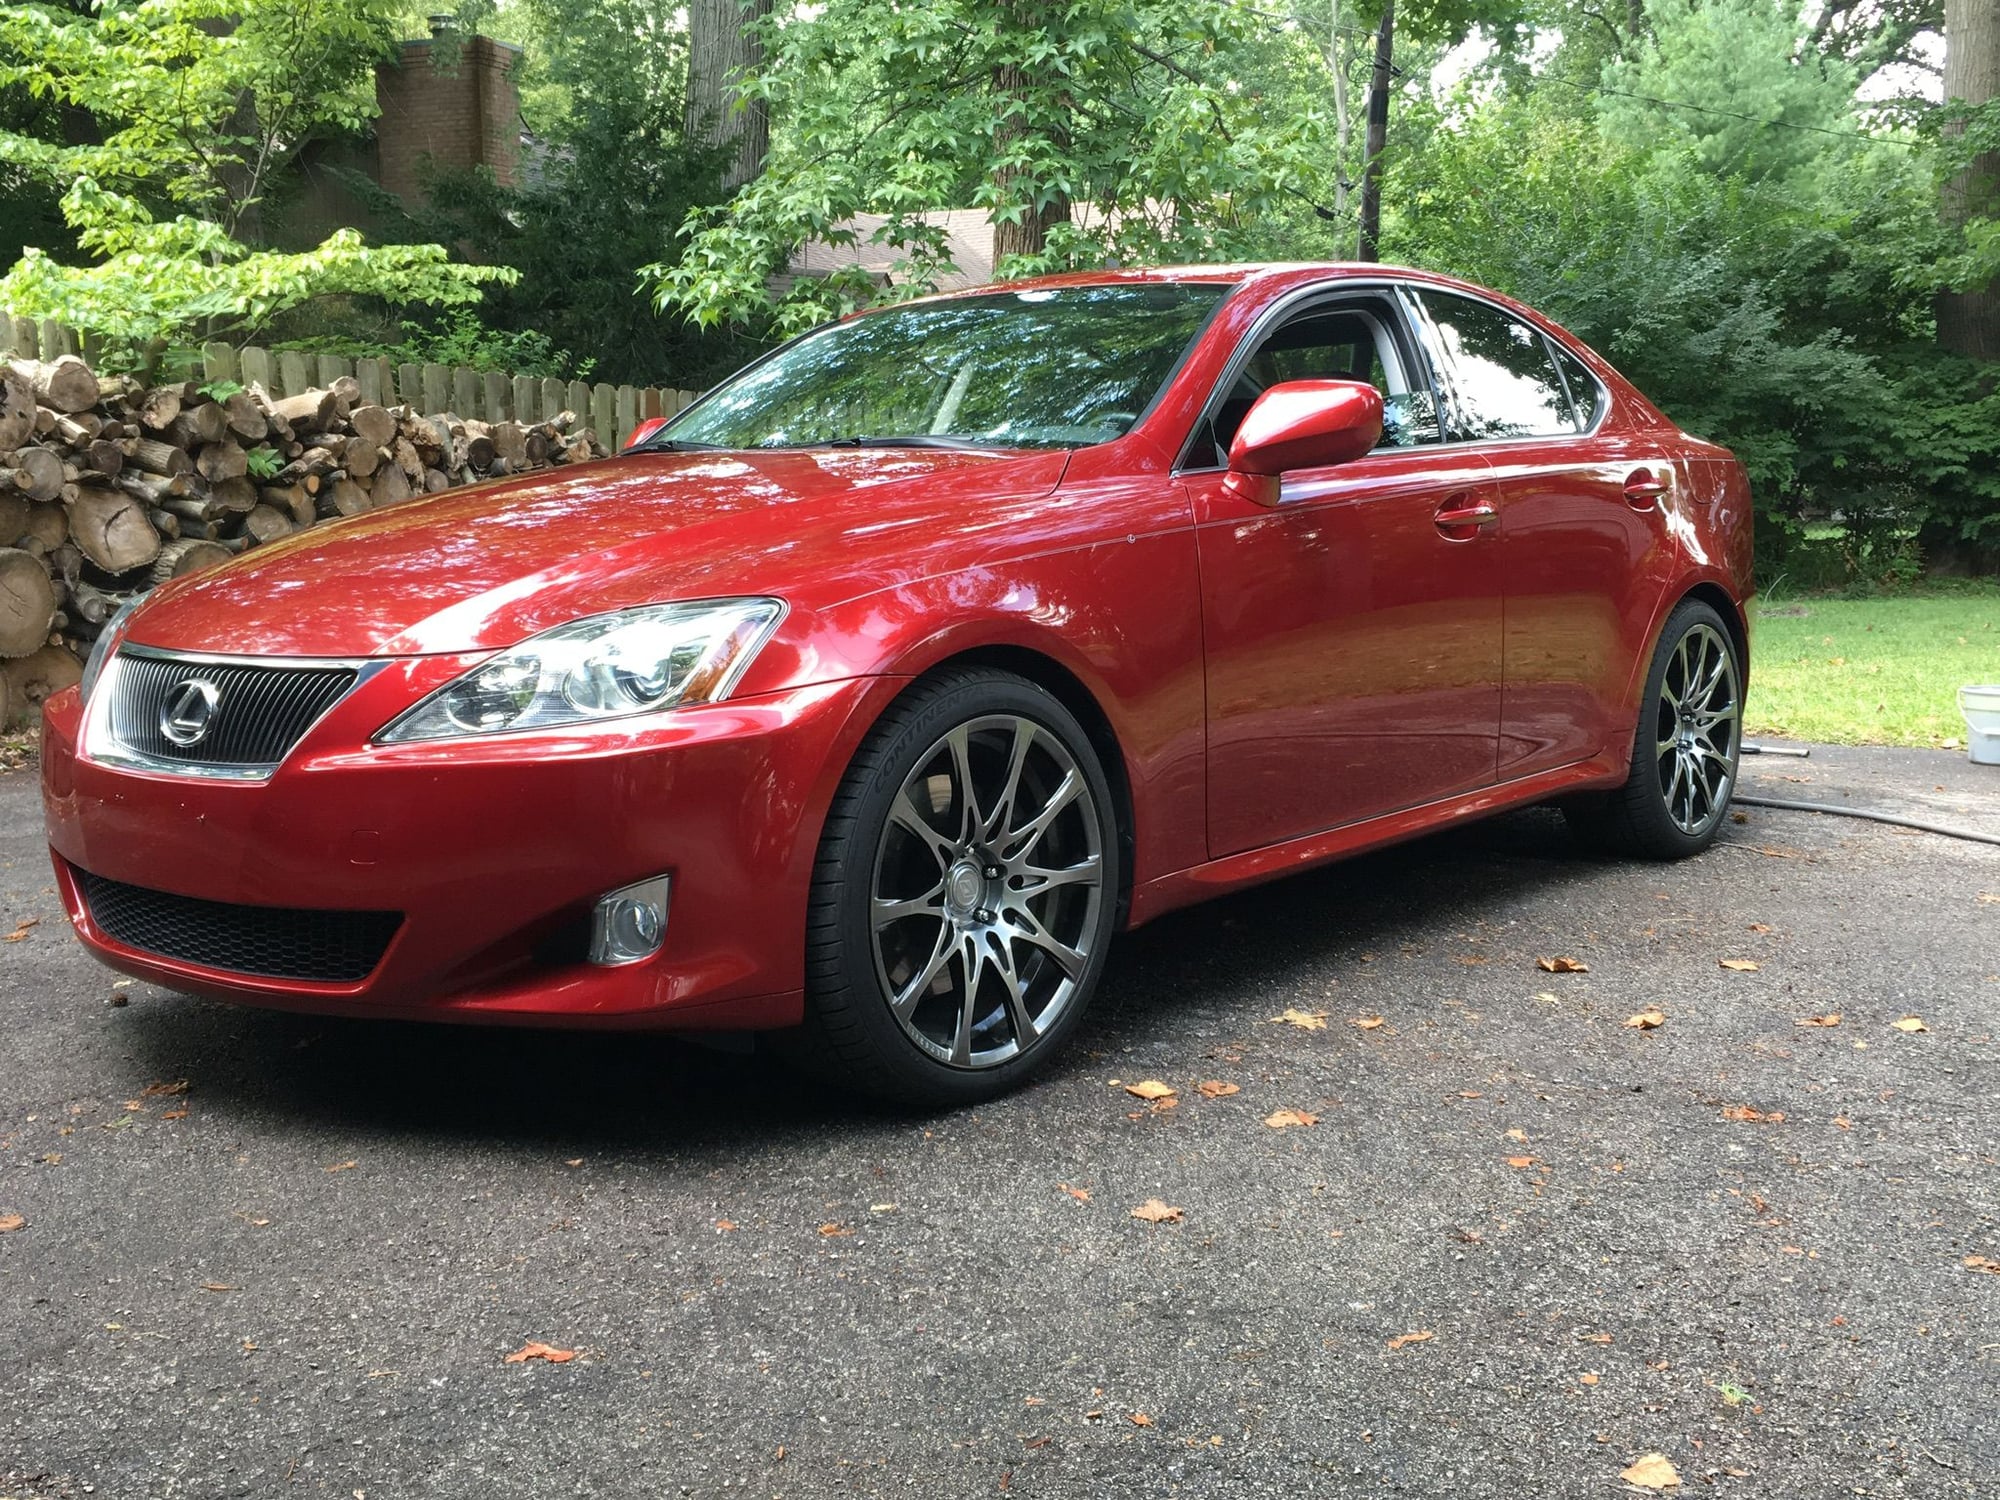 Wheels and Tires/Axles - Lexus Forged Fsport Wheels - Used - Indianapolis, IN 46228, United States